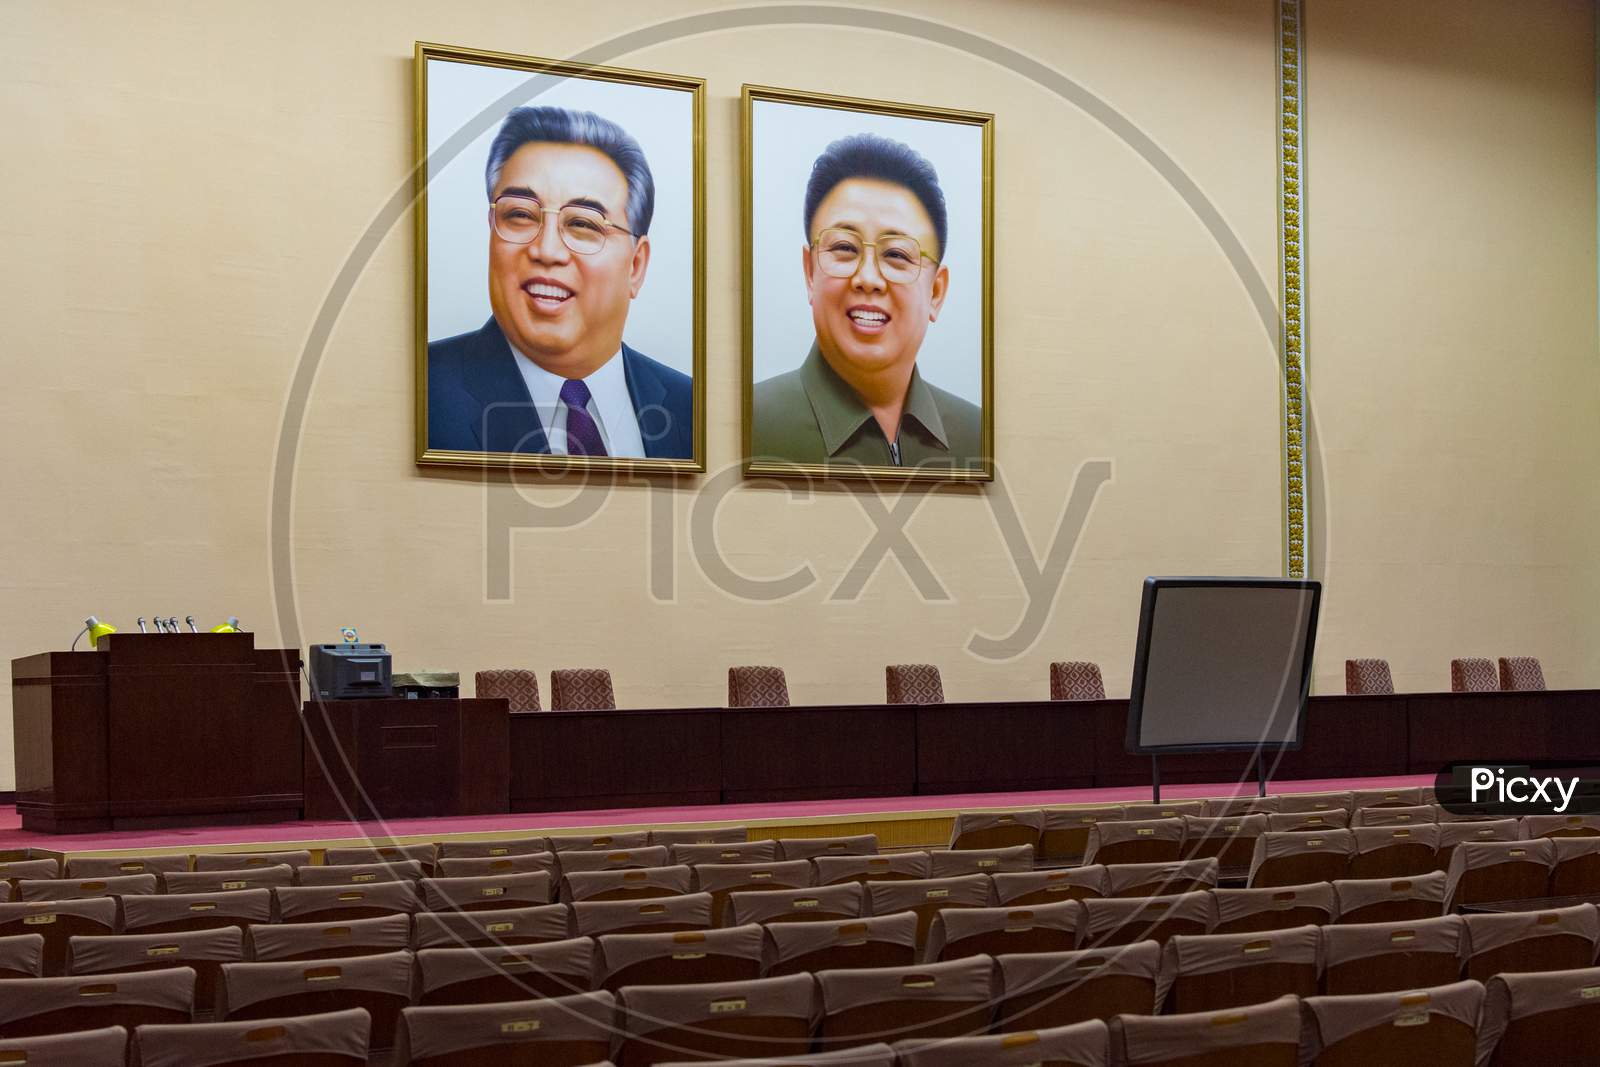 Portraits Of Kim Il Sung And Kim Jong Il At Grand People'S Study House In Pyongyang, North Korea